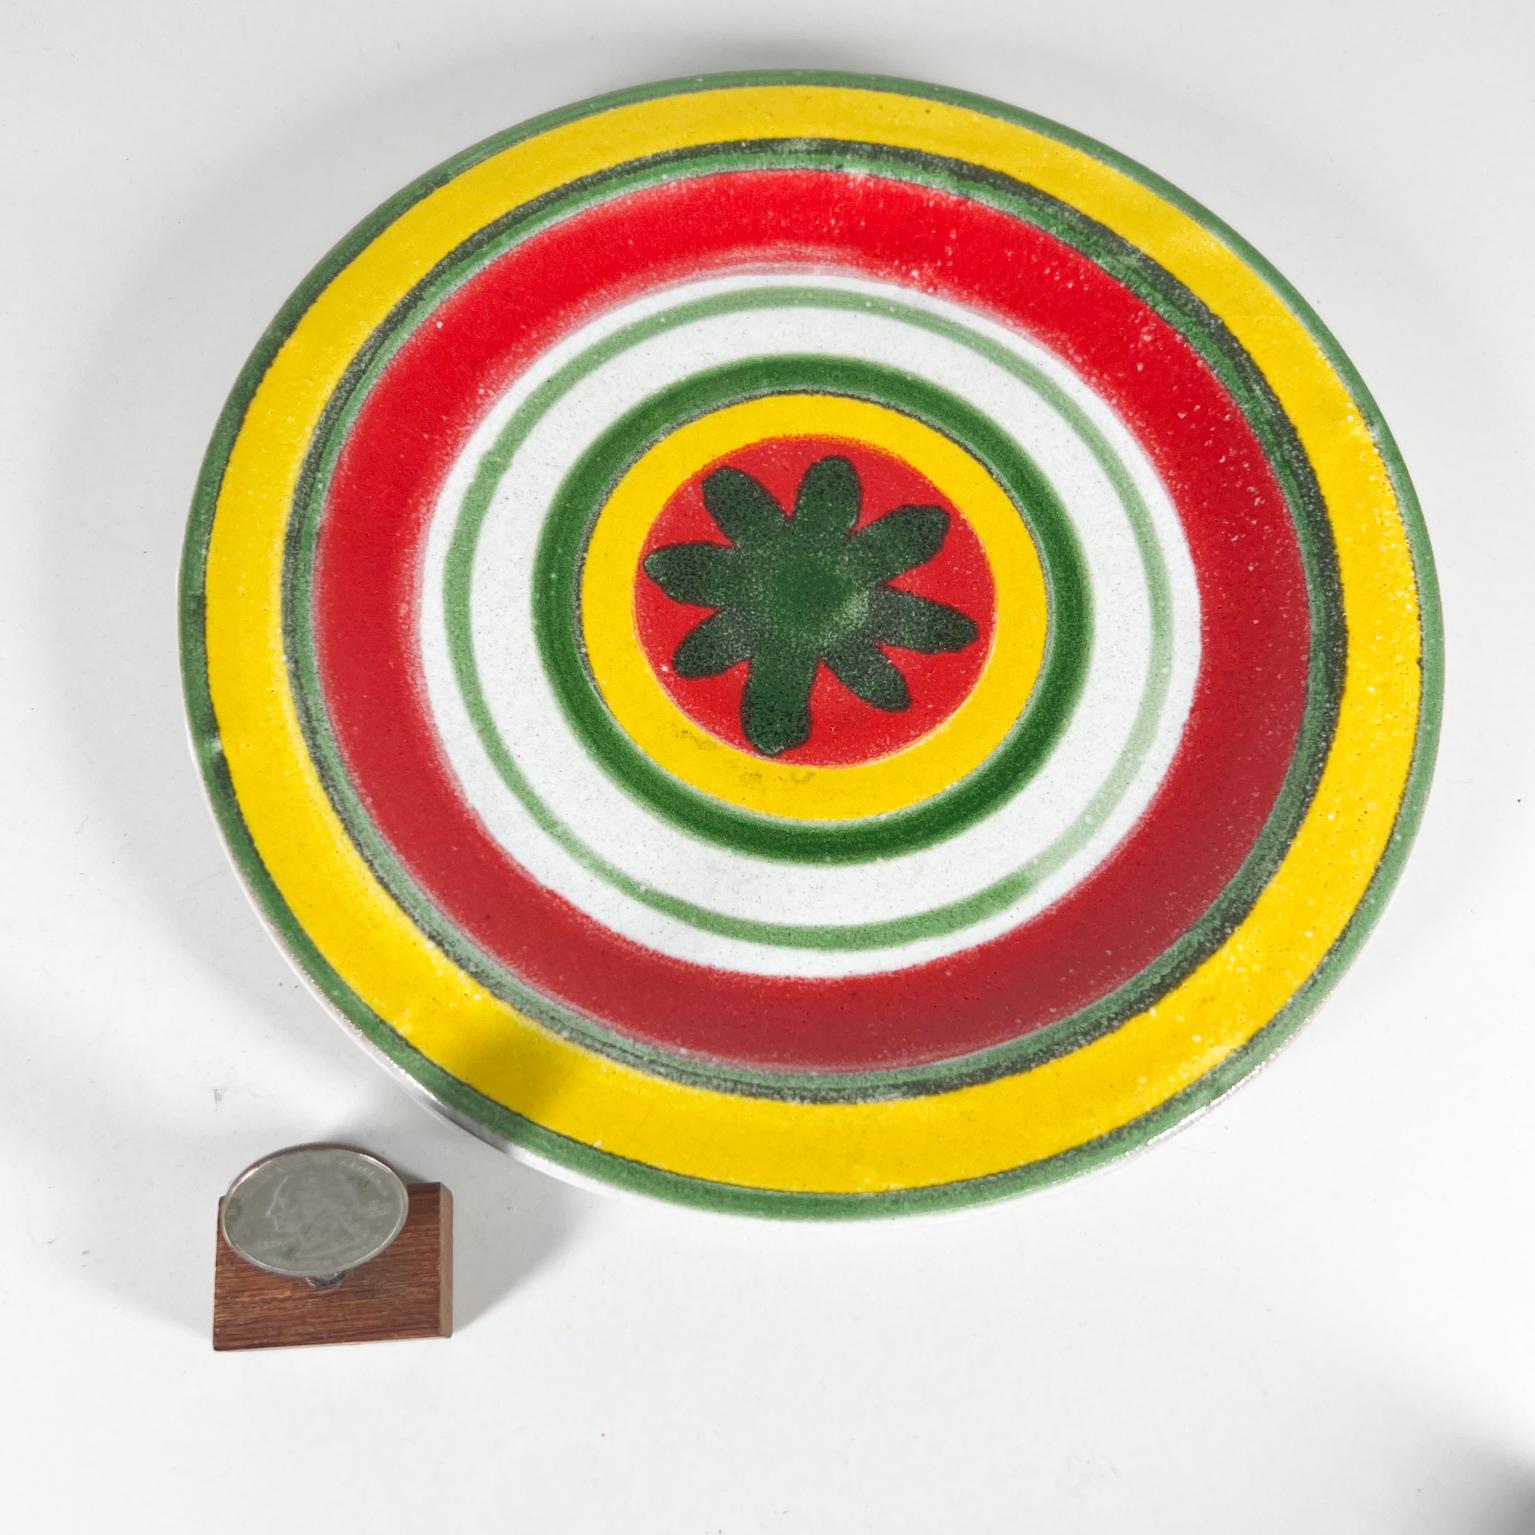 Mid-Century Modern 1960s Desimone Ceramic Pottery Italy Art Plate Yellow Red Green Hand Painted